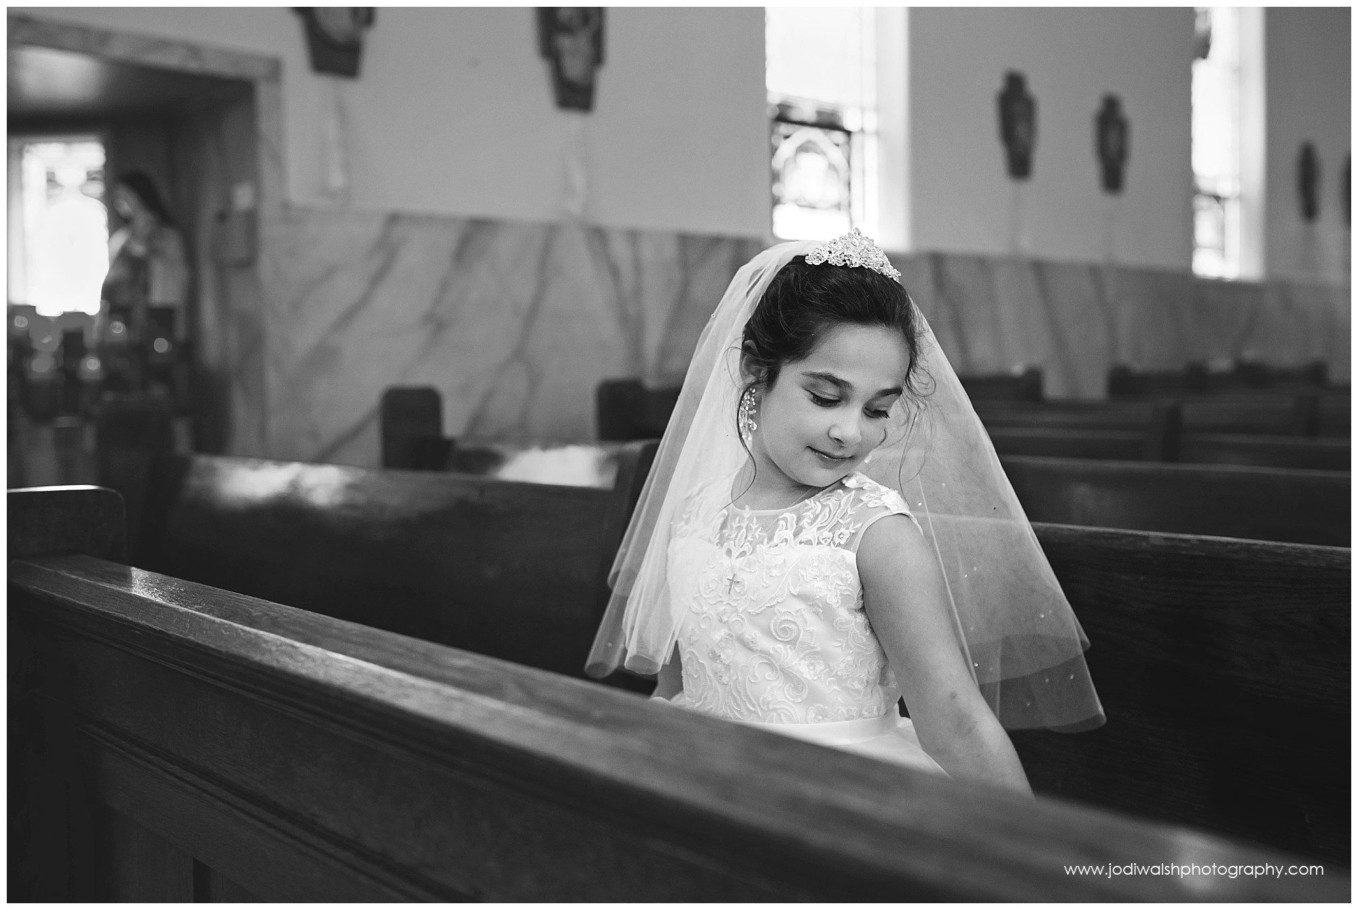 image of a little girl in white dress and veil sitting in church pew looking down